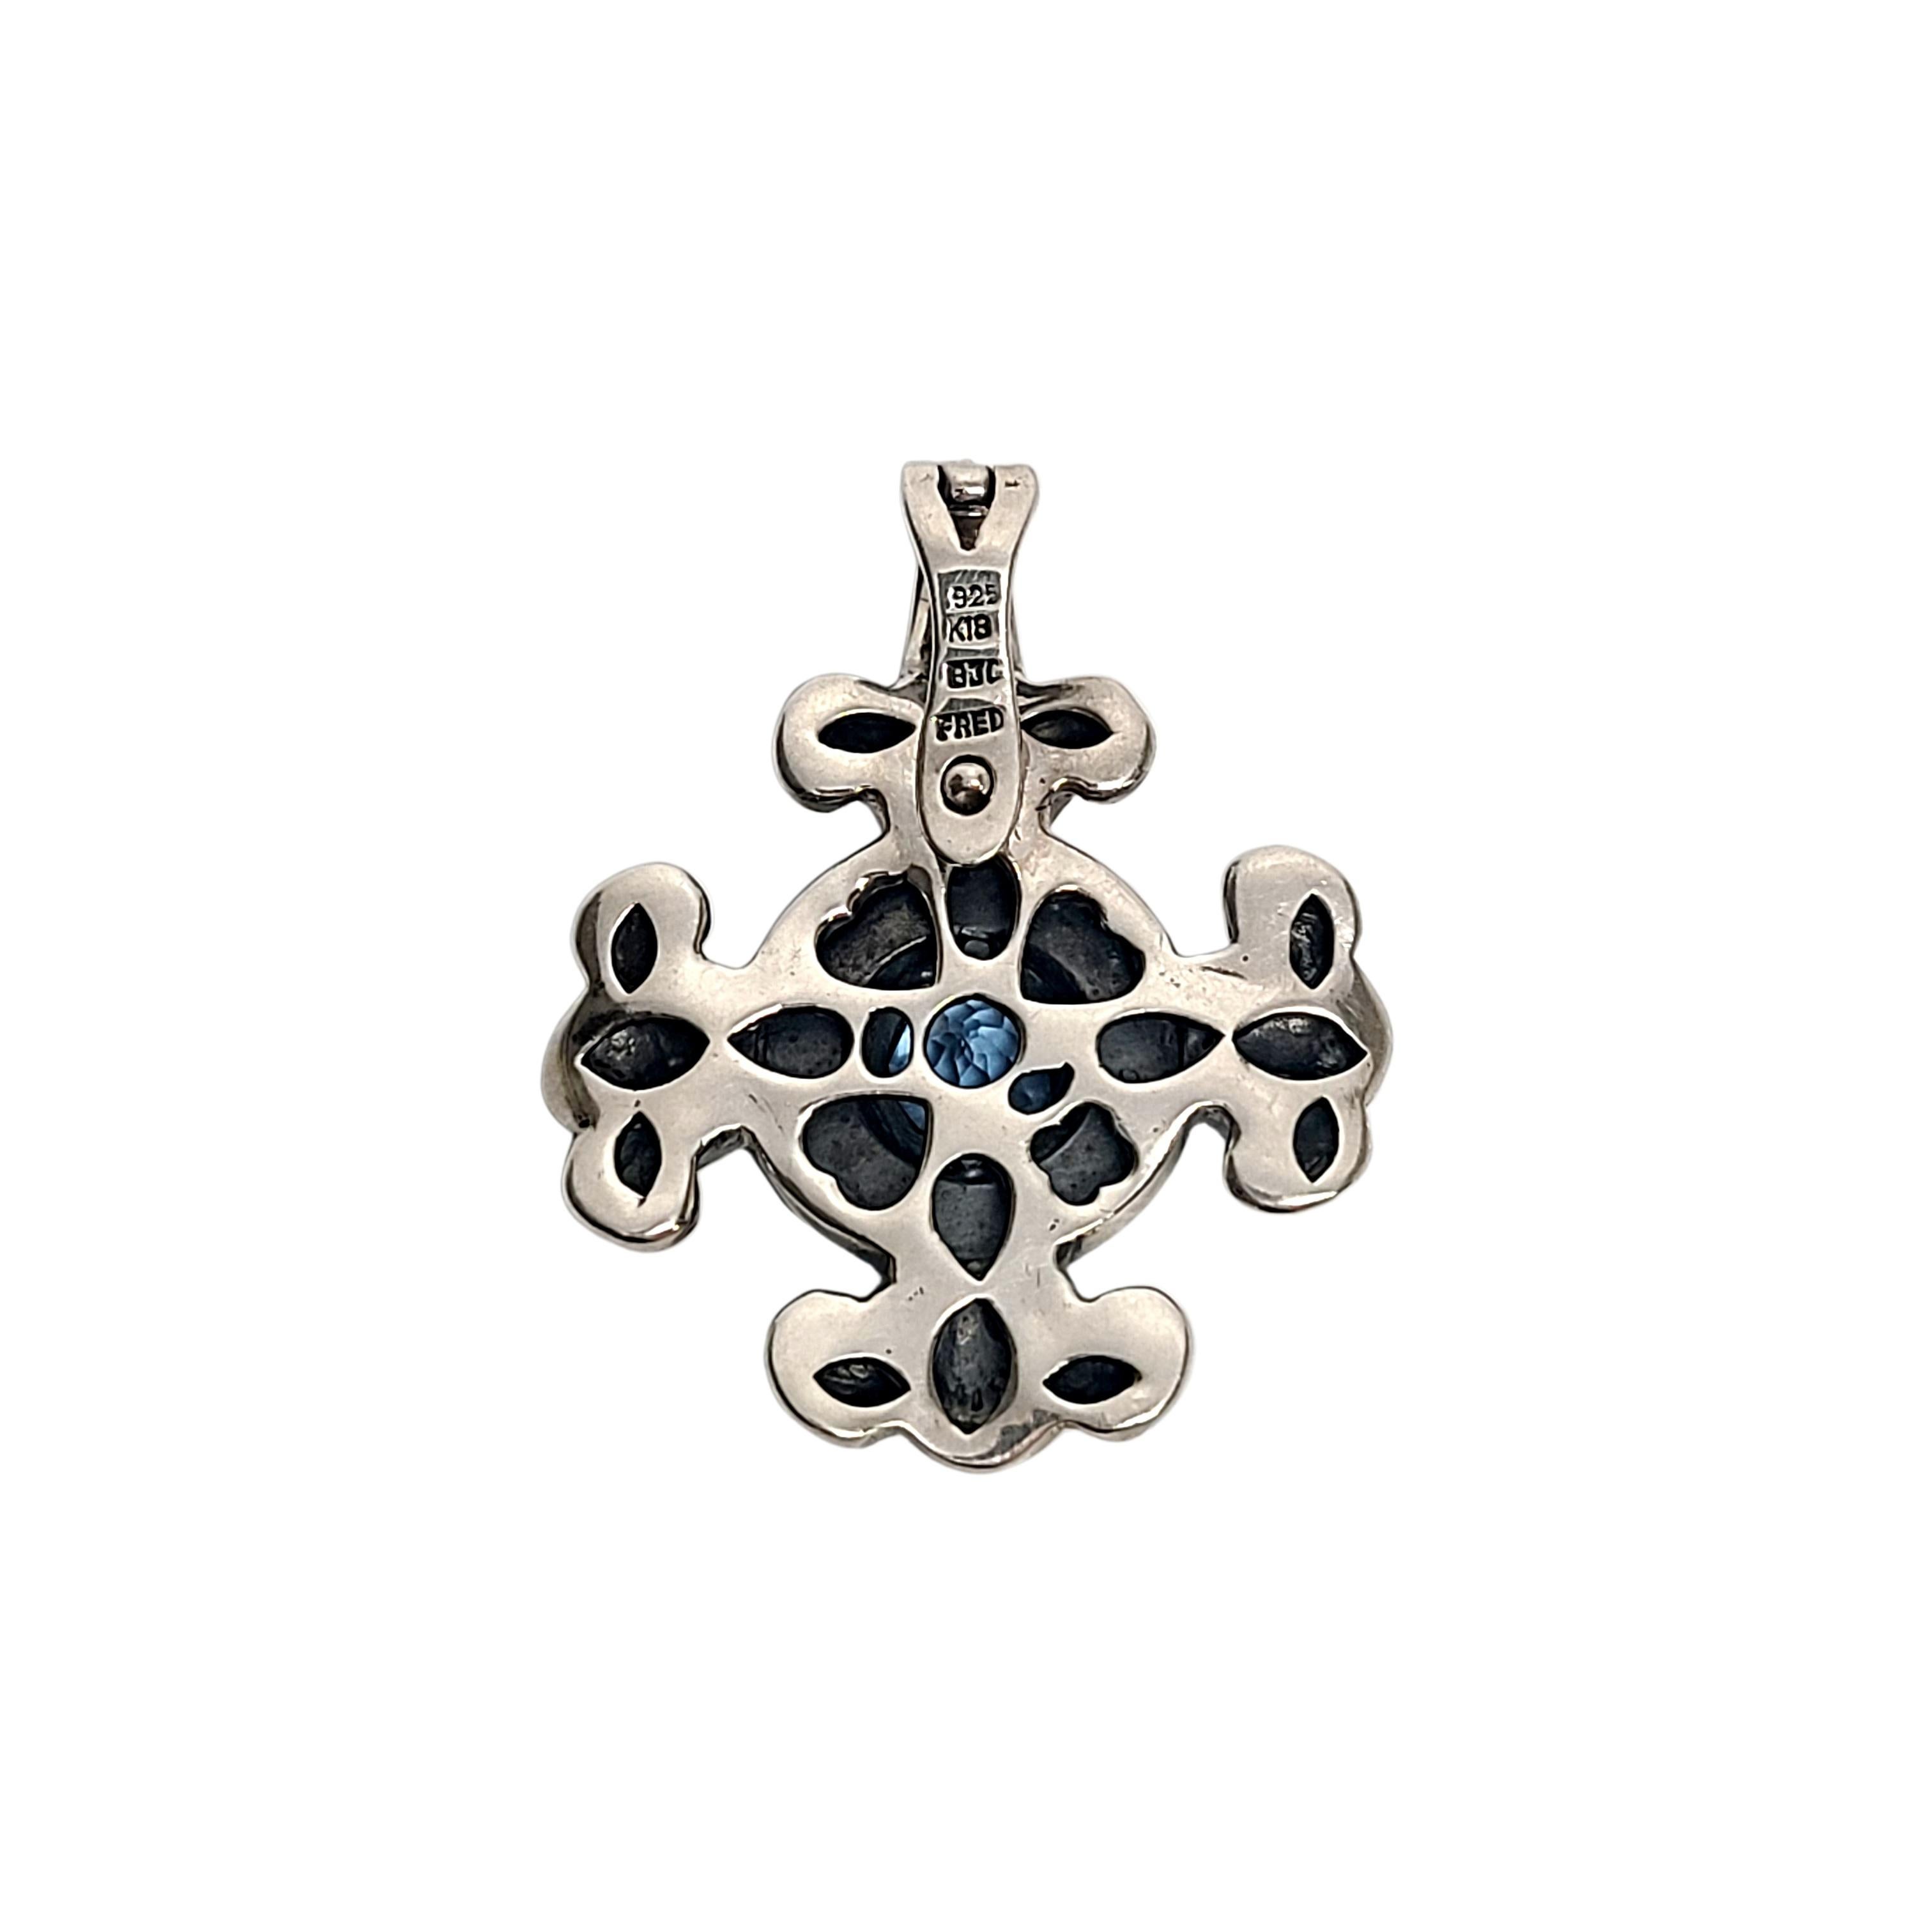 Sterling silver 18K yellow gold accent blue topaz pendant by Samuel Benham BJC Fred.

Round blue topaz stone stone set sterling silver cross shape pendant with yellow gold beaded accents around the stone. Hinged opening bail.

Measures approx 1 